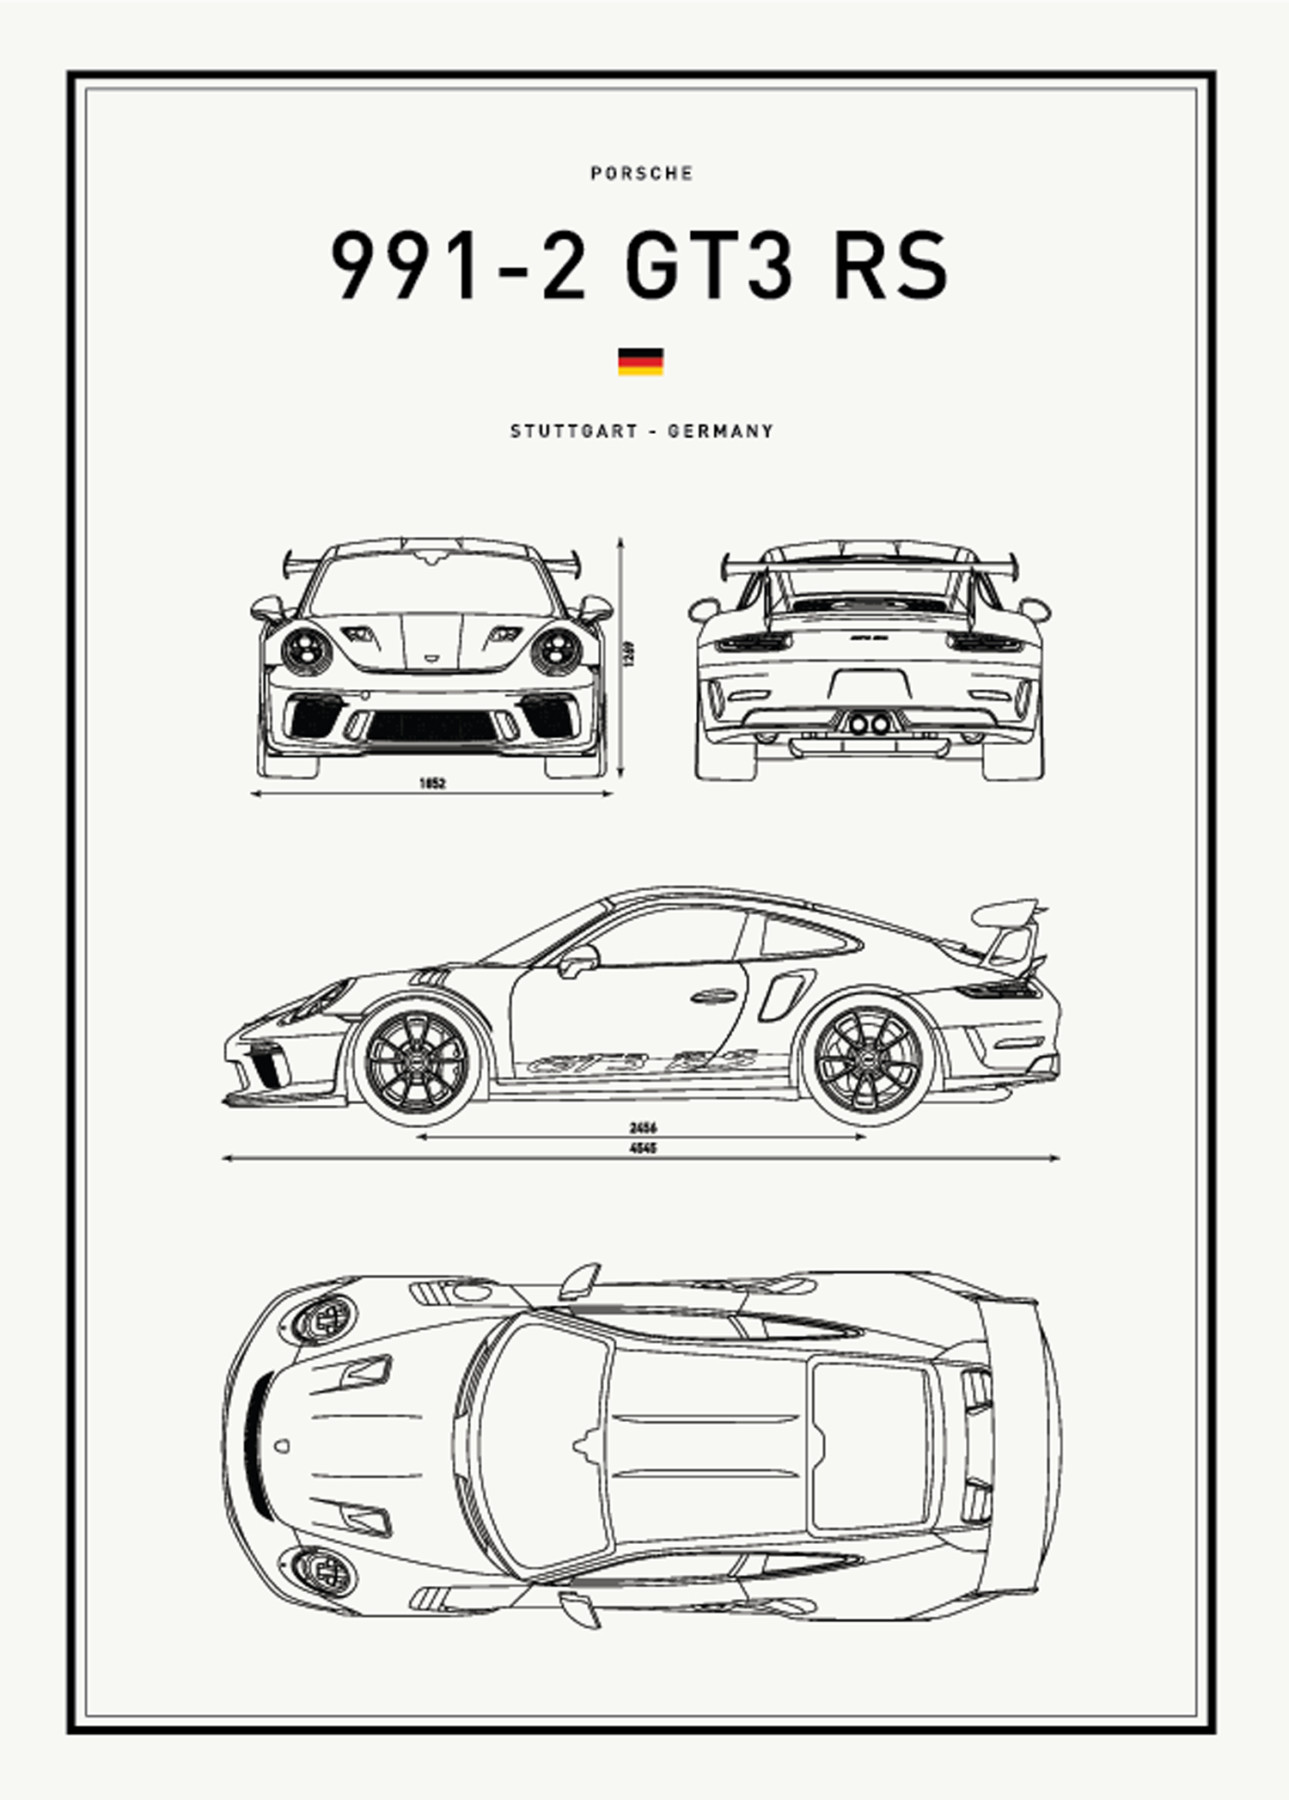 P-991-2_GT3_rs